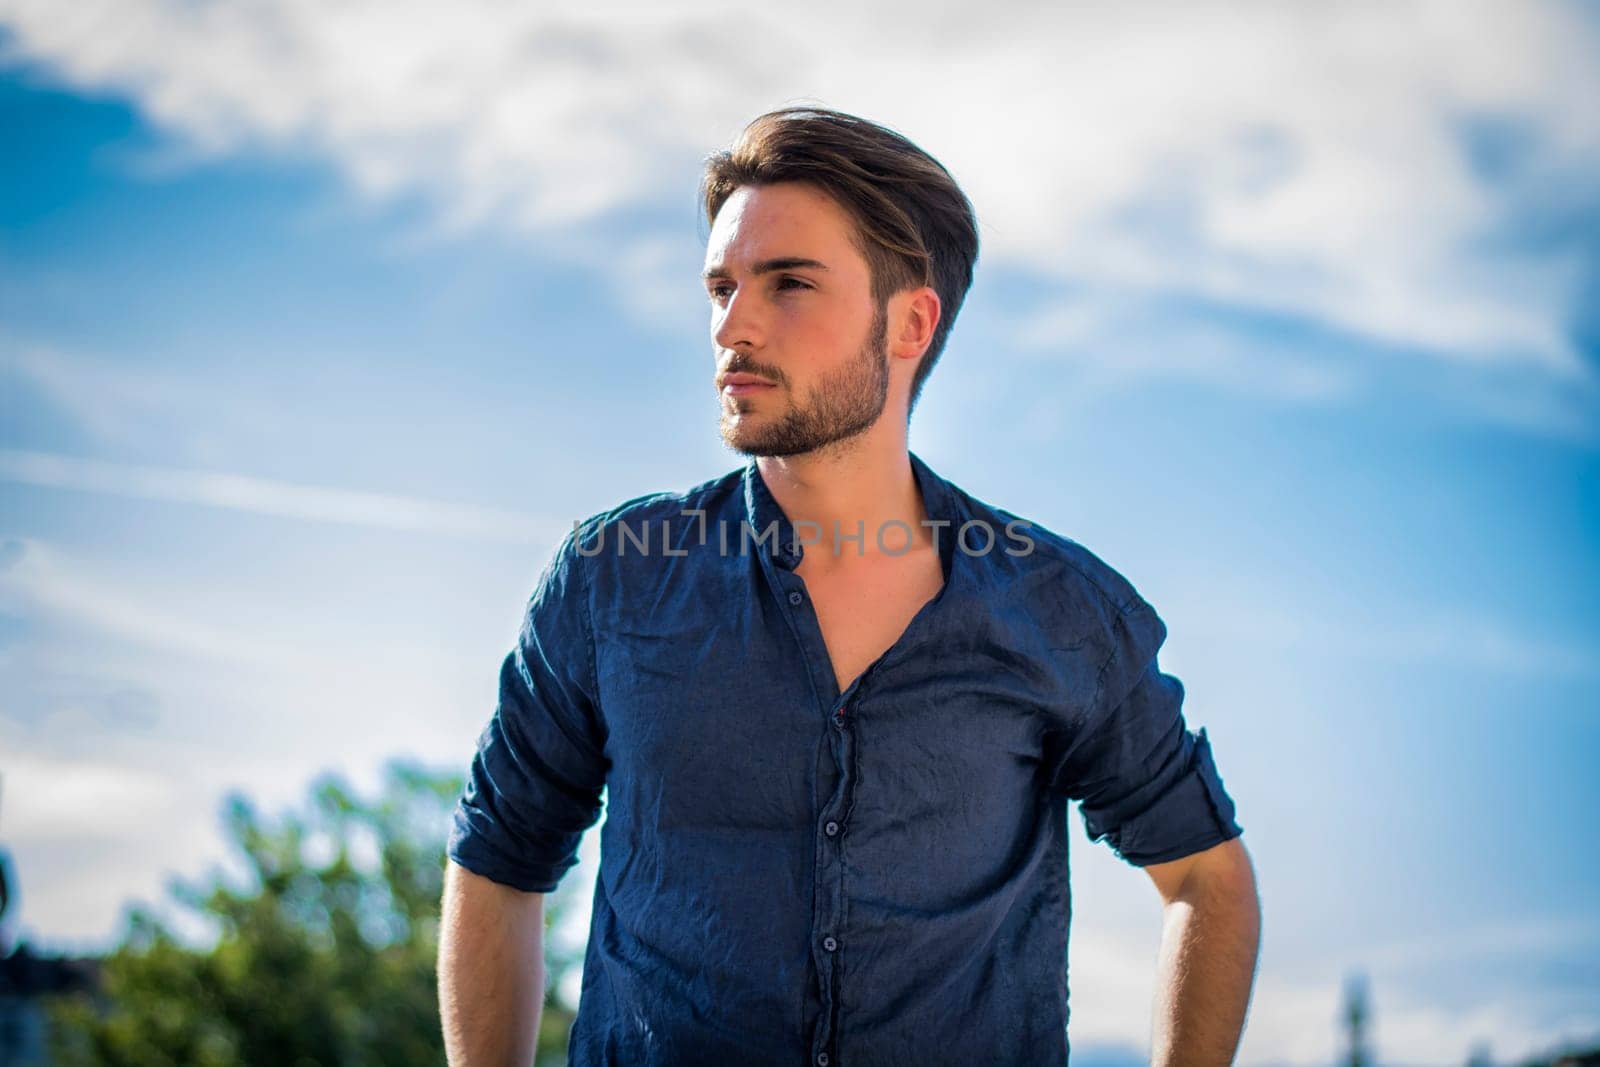 One handsome young man in urban setting in summer day, wearing blue shirt